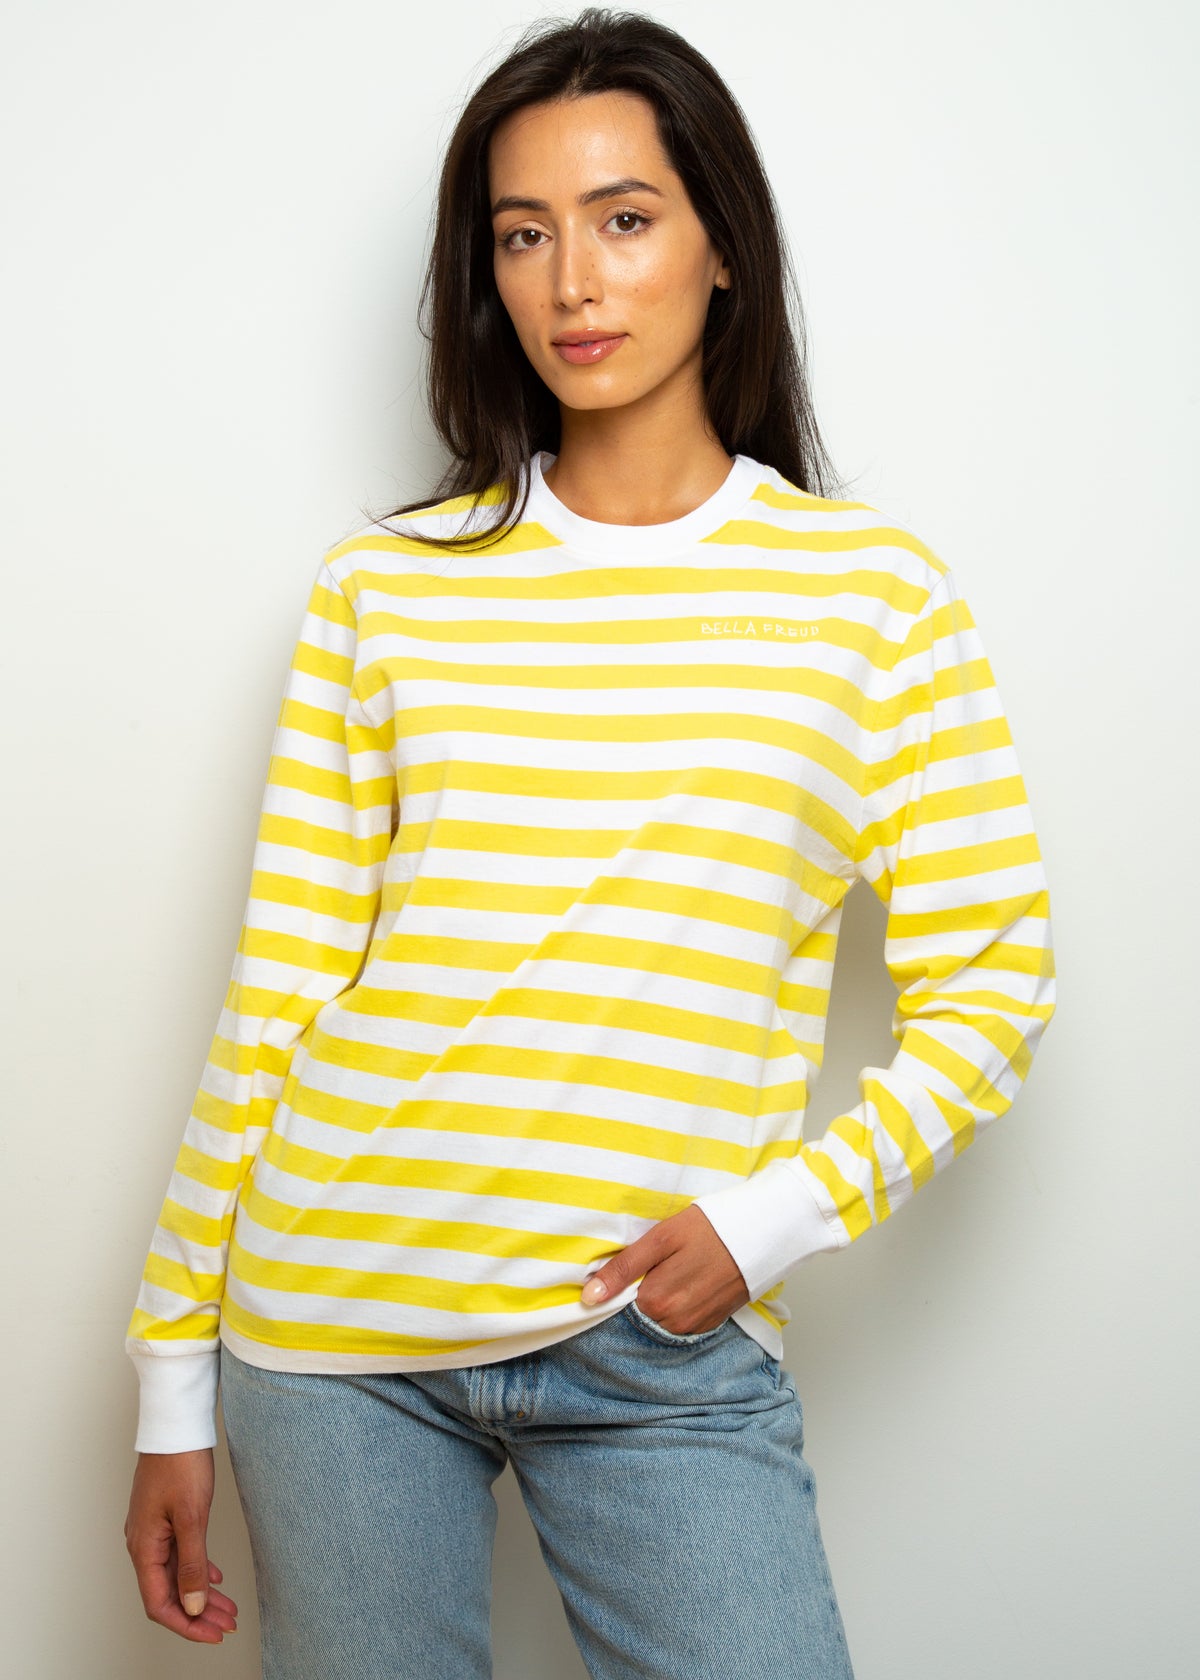 BF LS Striped Top in Yellow, White